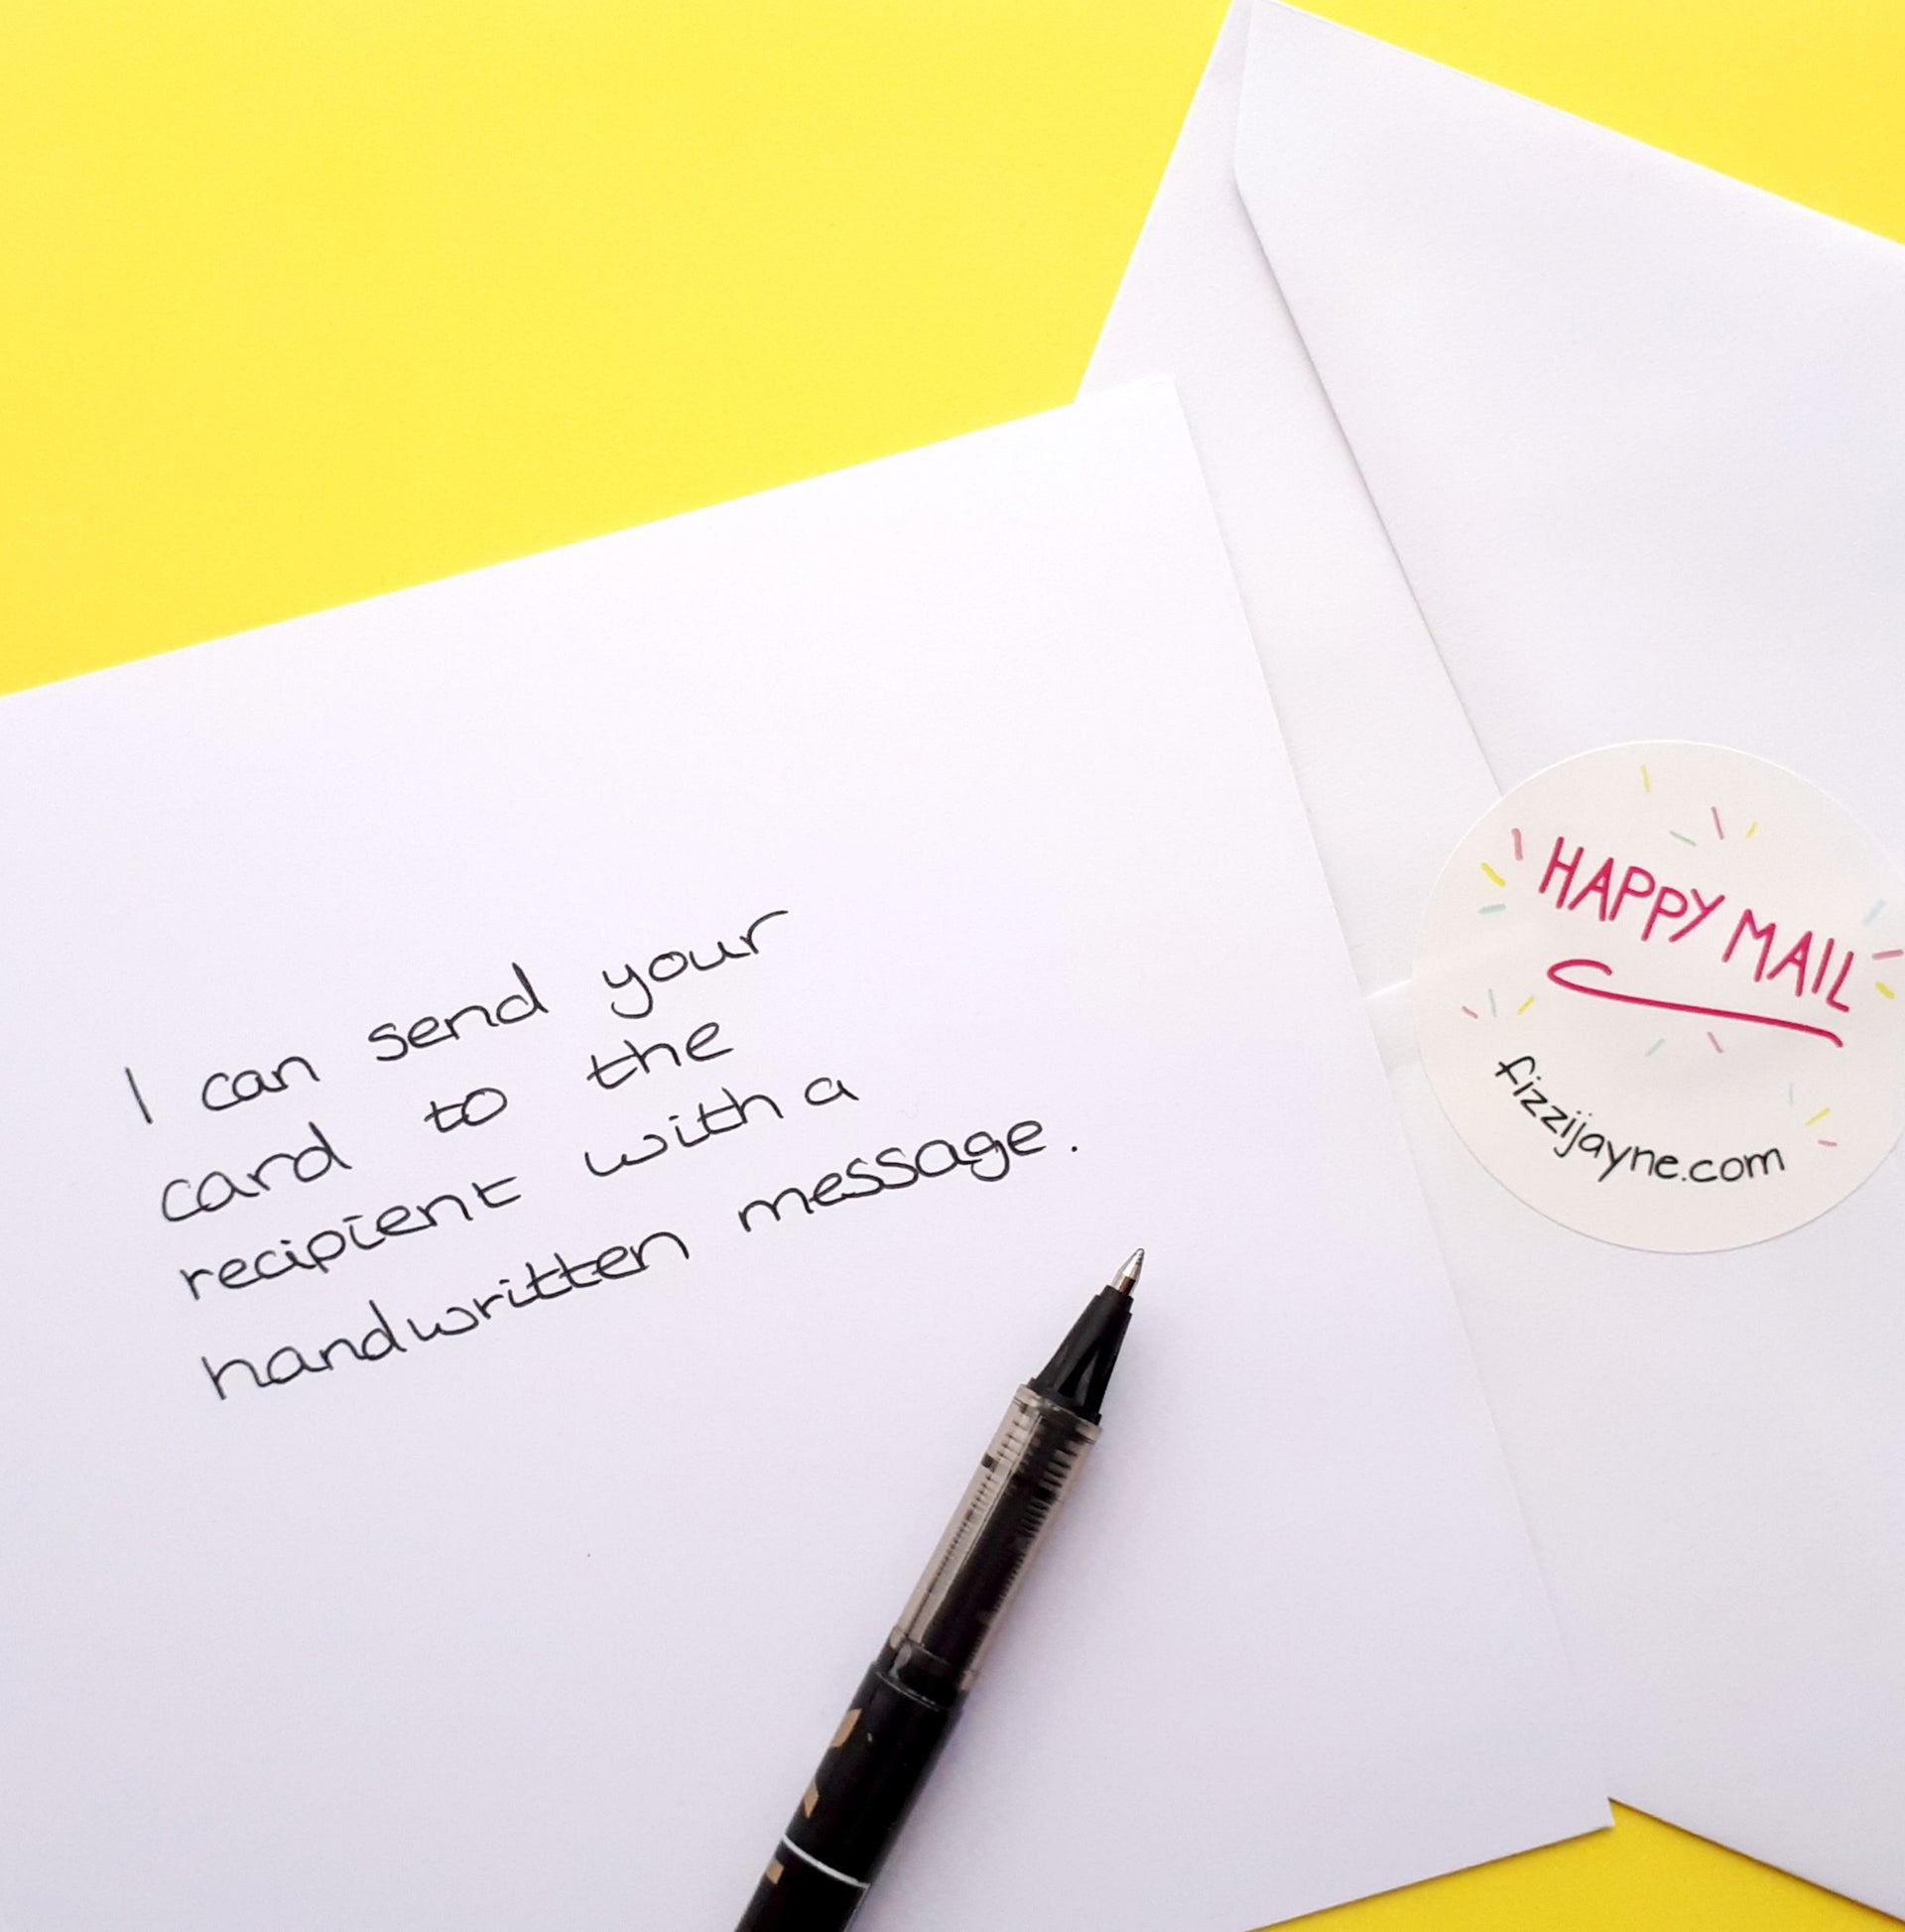 I can send your card to the recipient with a handwritten message